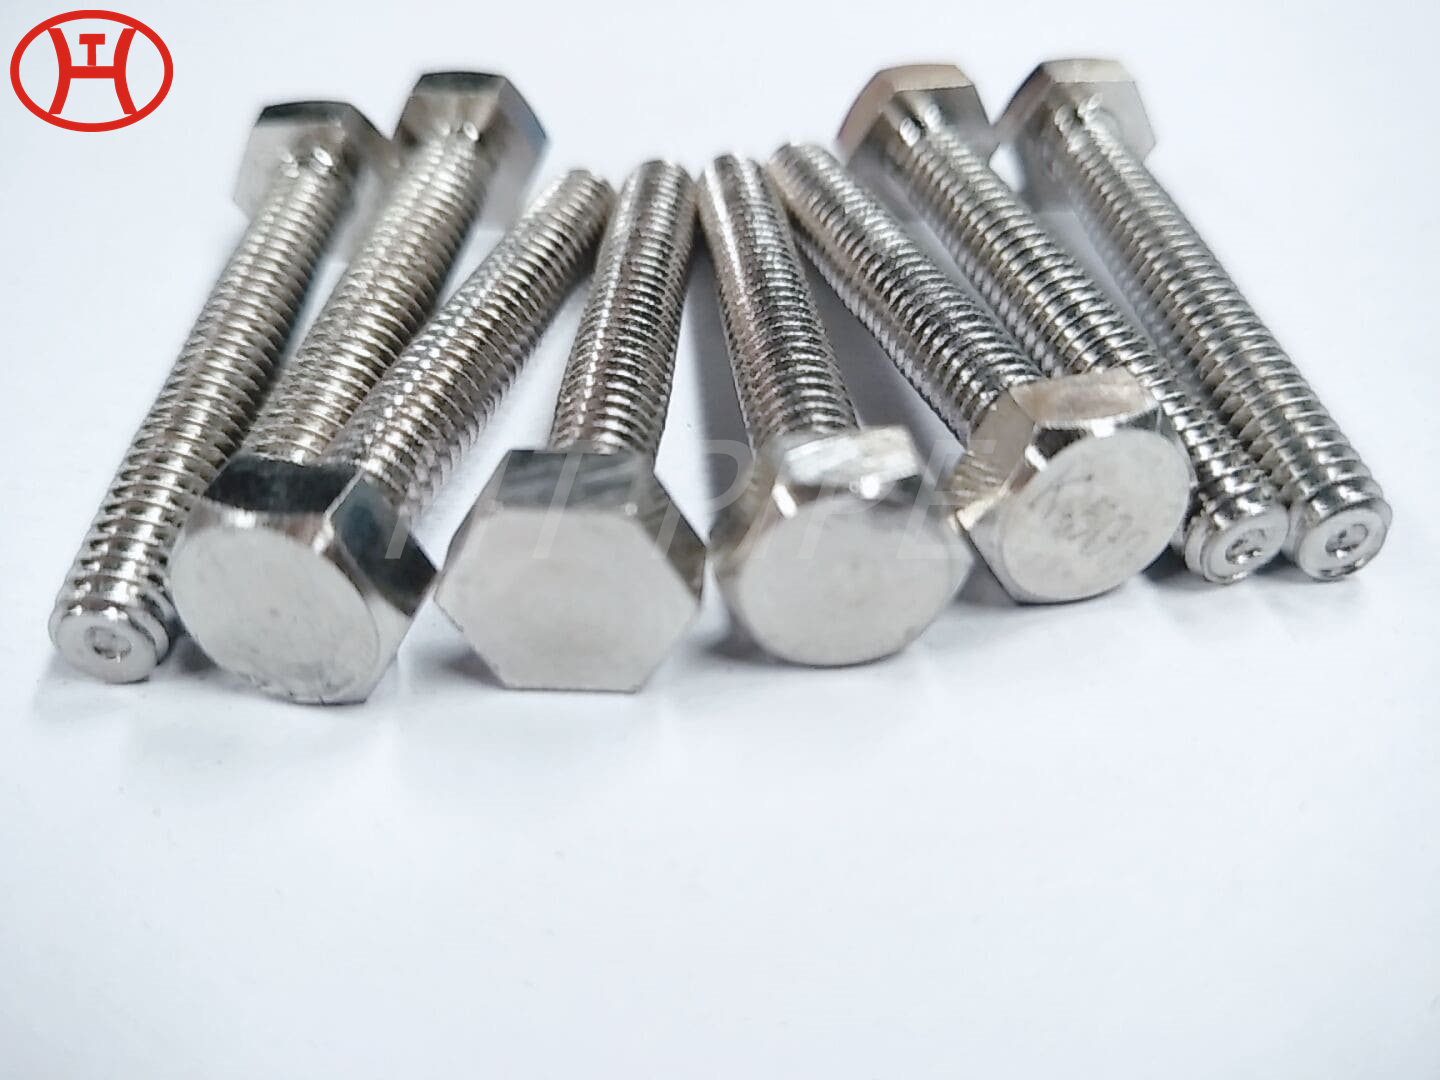 DIN931 ASTM A193 B7 partial thread Nature alloy steel din931-8.8 bolts alloy steel hex bolt